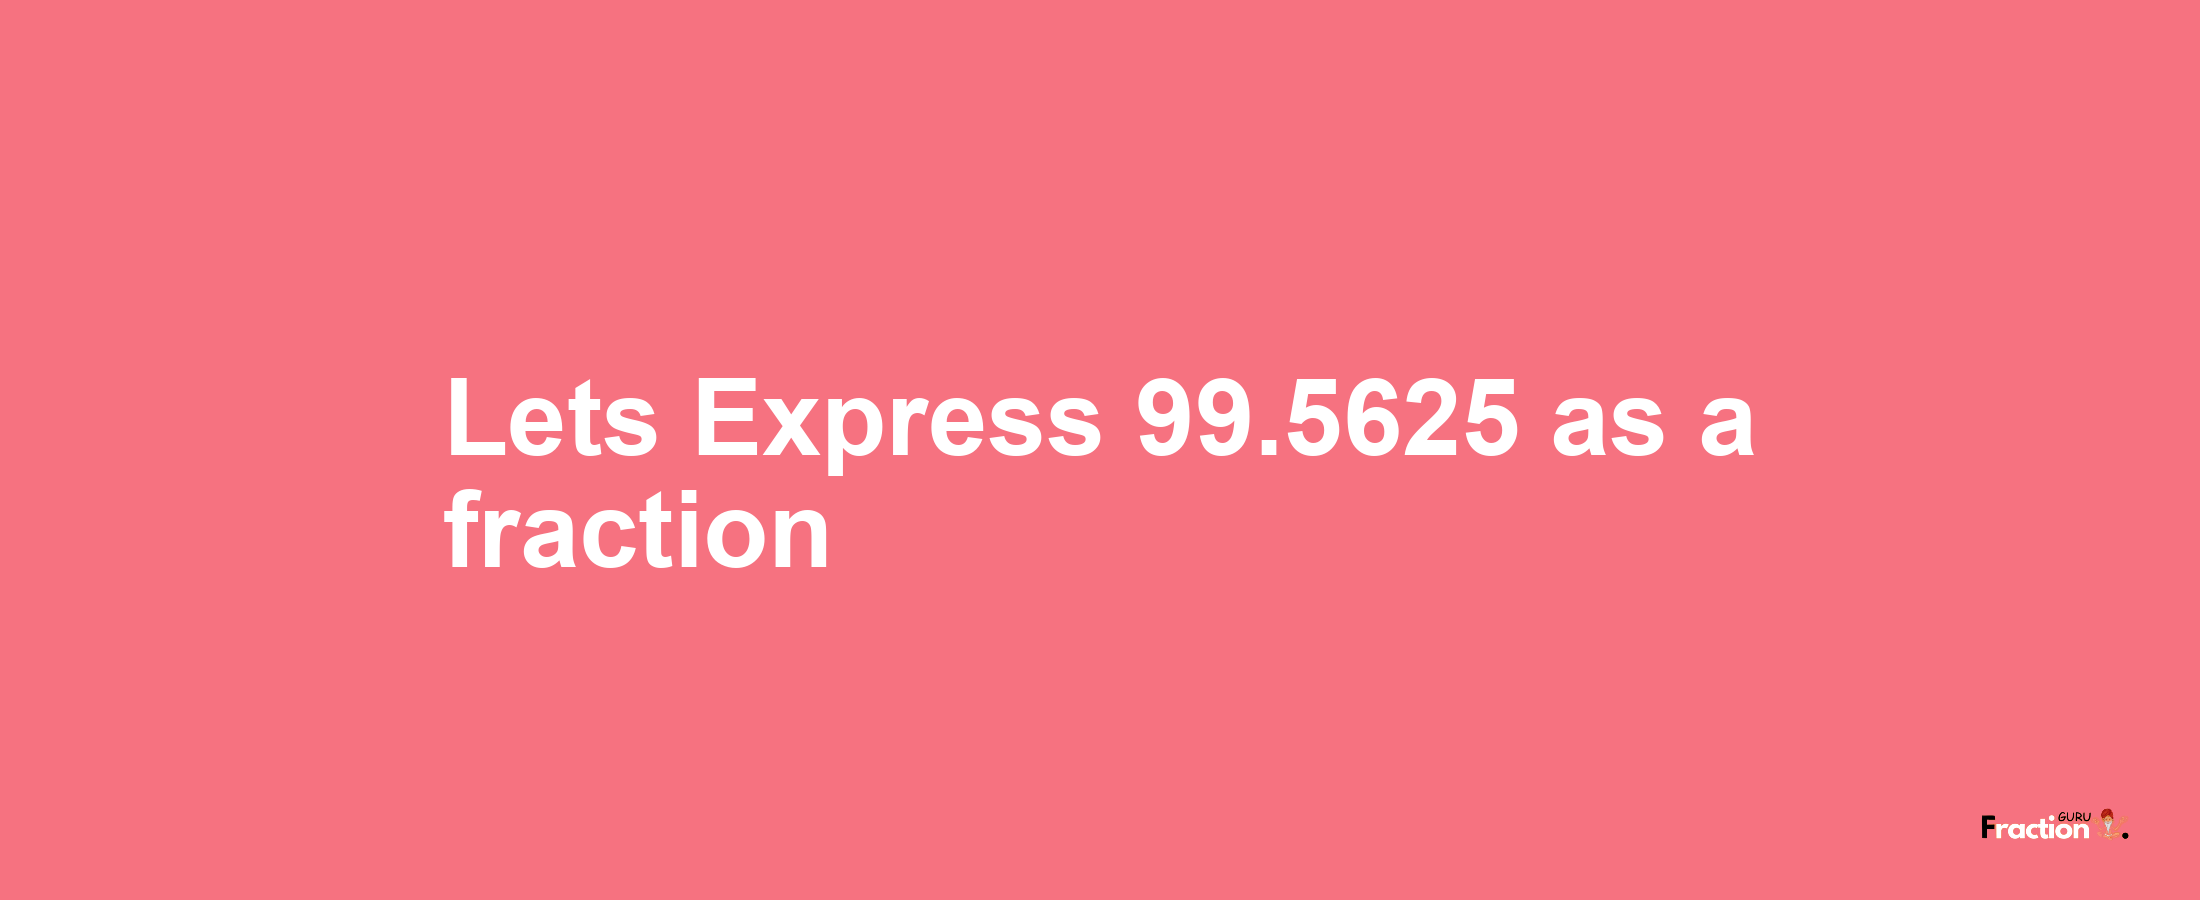 Lets Express 99.5625 as afraction